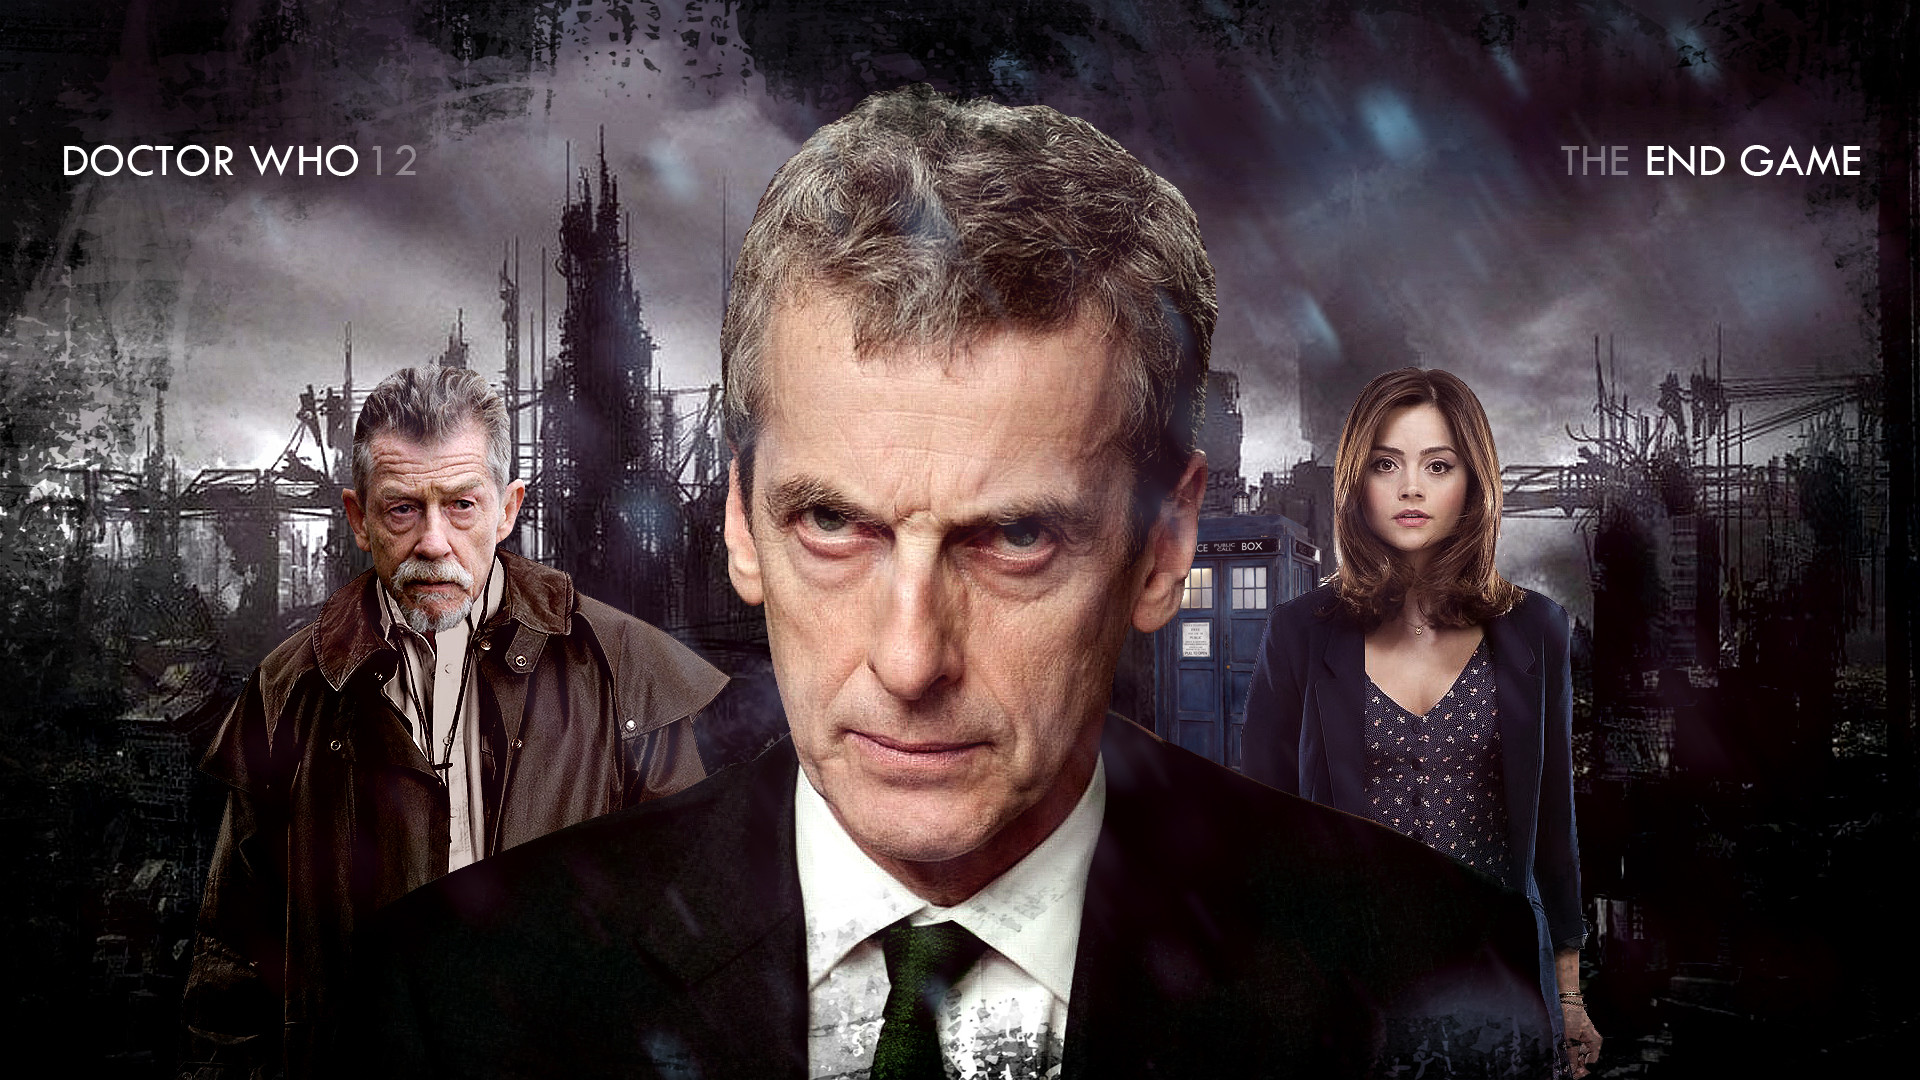 1920x1080 all 12 doctors wallpaper - photo #19. More Doctor Who fanart! The itch is  getting worse though.